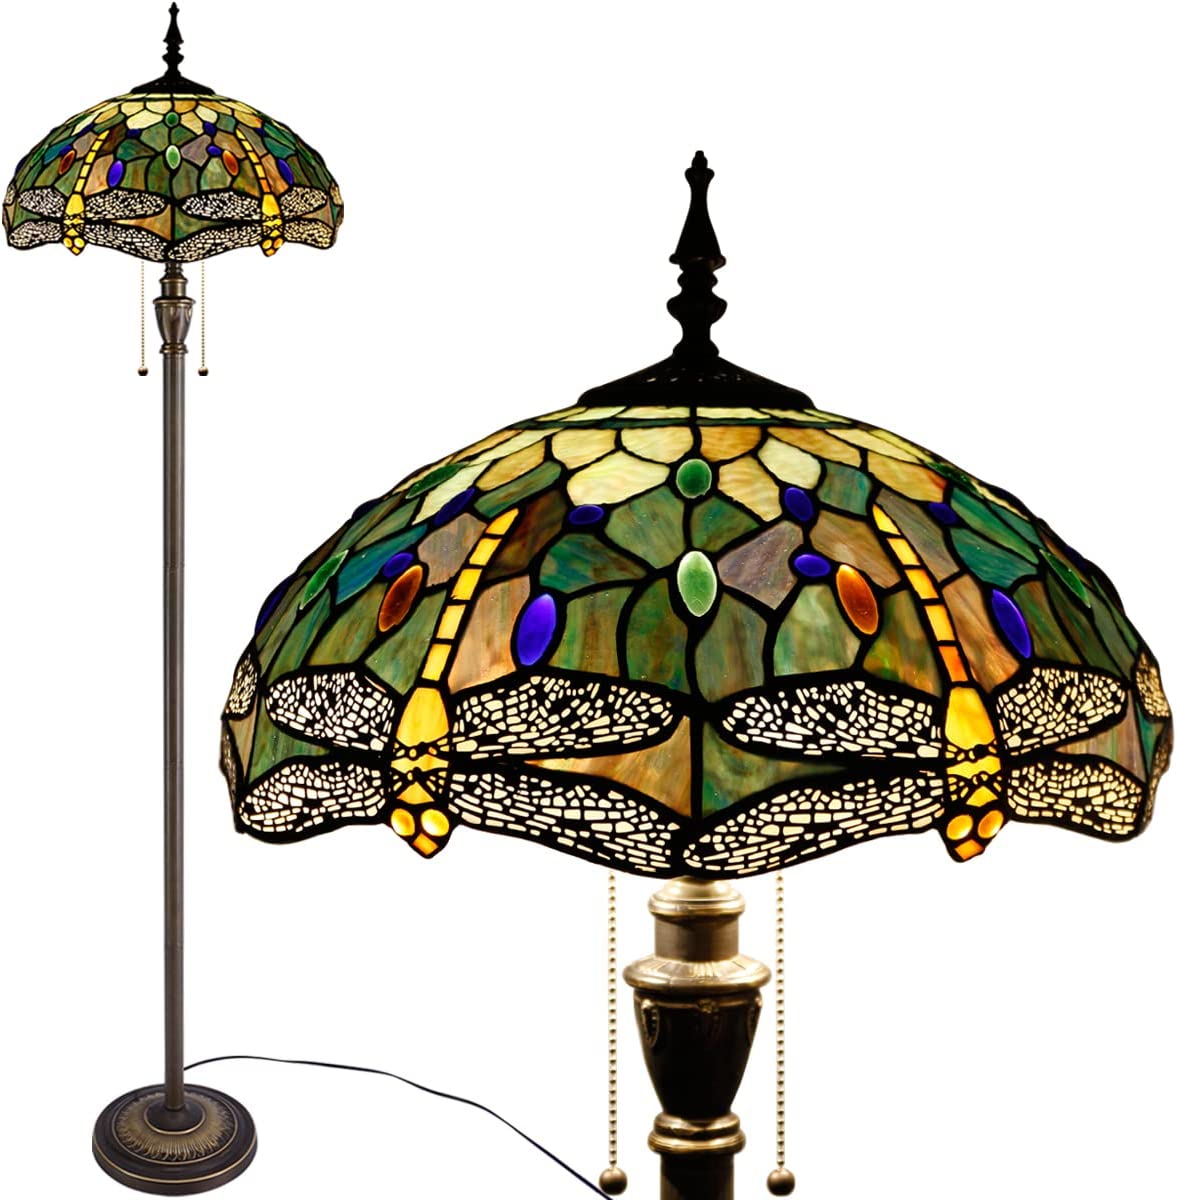 BBNBDMZ  Floor Lamp Stained Glass Dragonfly Style Reading Lamp W16H70 Inch Tall Antique Standing Pole Light Bronze Finsh  Bright Lighting Decor  Corner Living Room Bedroom Office